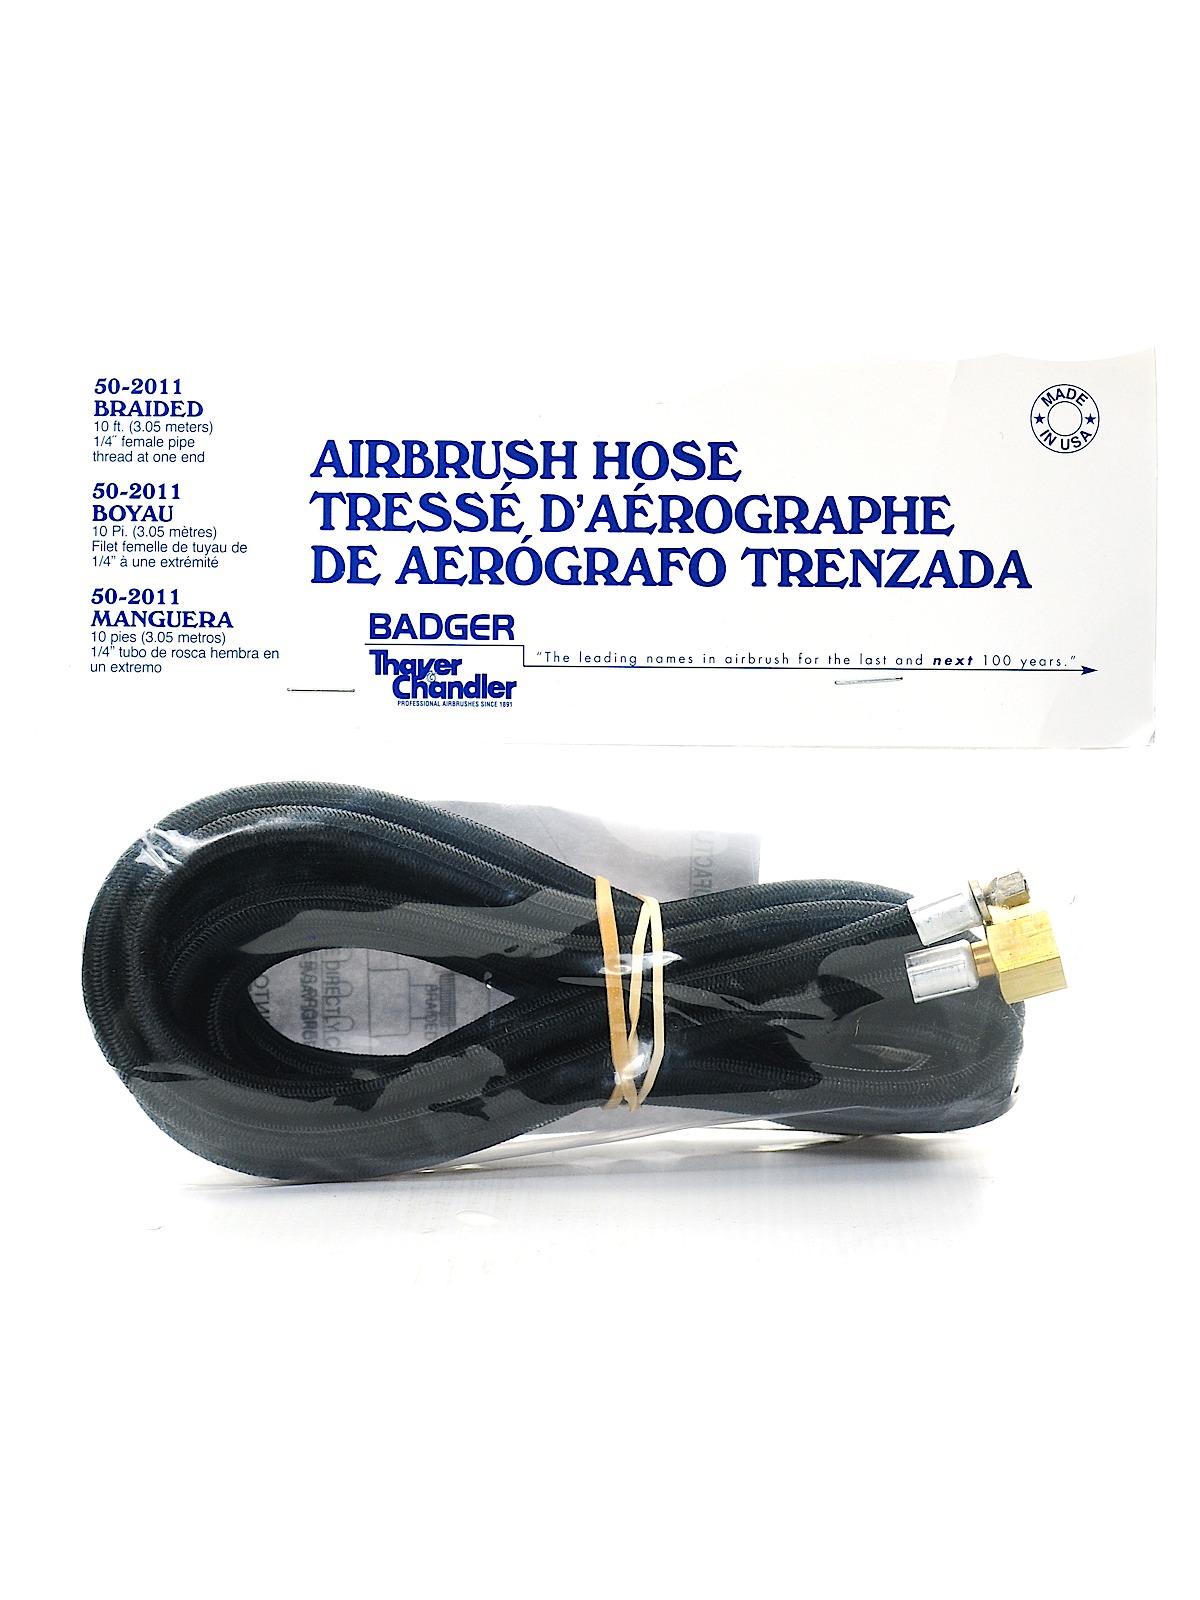 Airbrush Parts 10 Ft. Braided Hose With 1 4 In. Female Adapter  50-2011